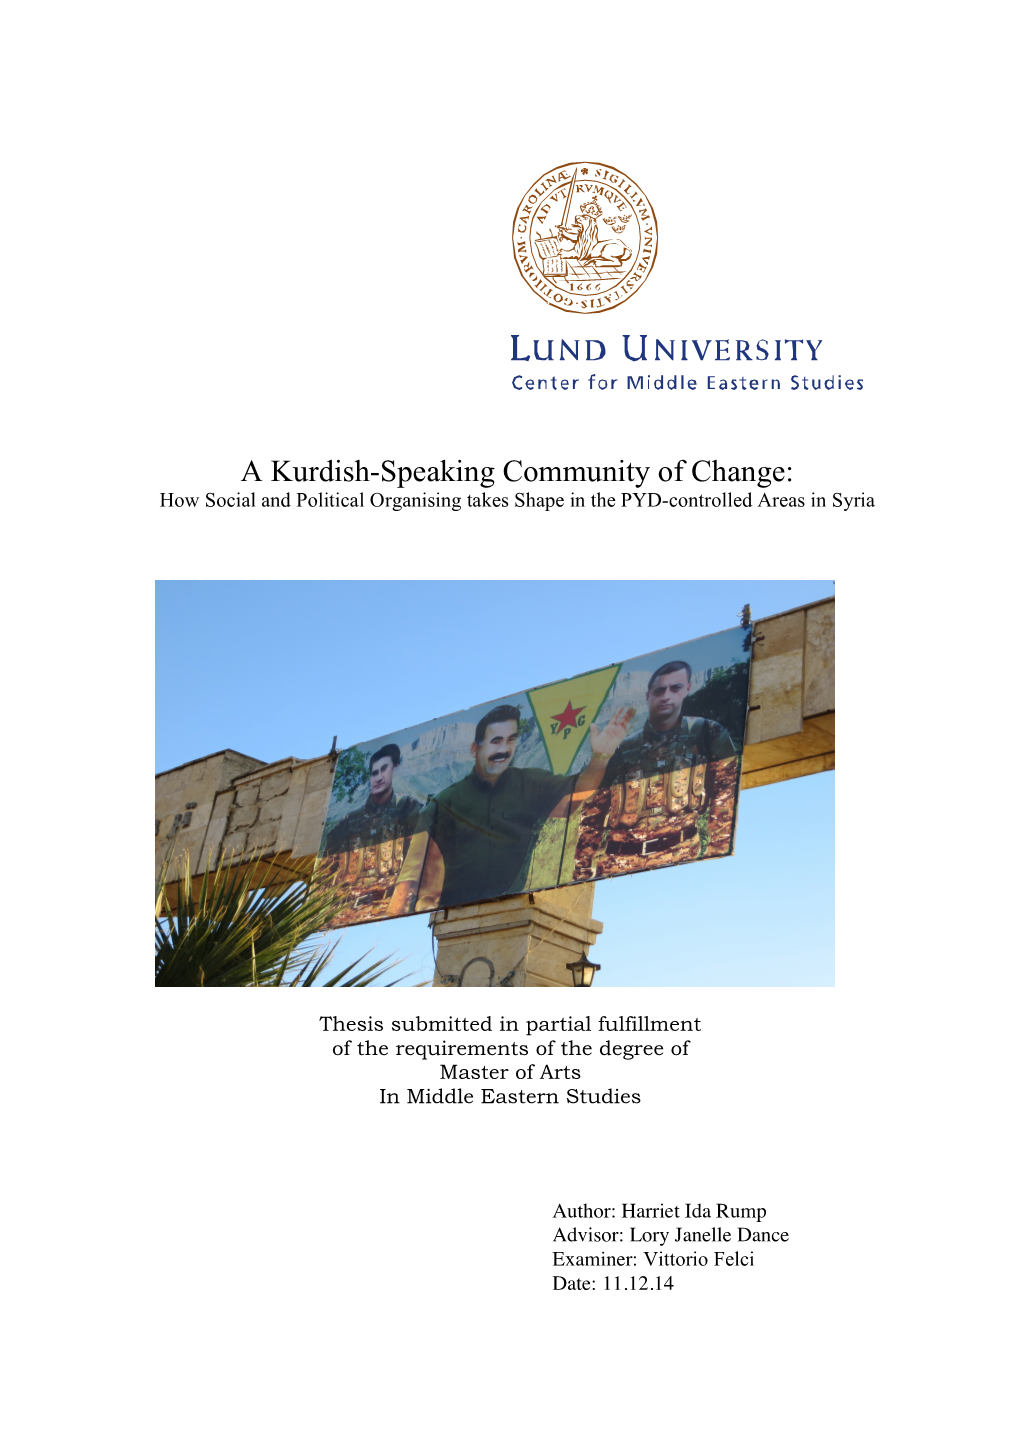 A Kurdish-Speaking Community of Change: How Social and Political Organising Takes Shape in the PYD-Controlled Areas in Syria